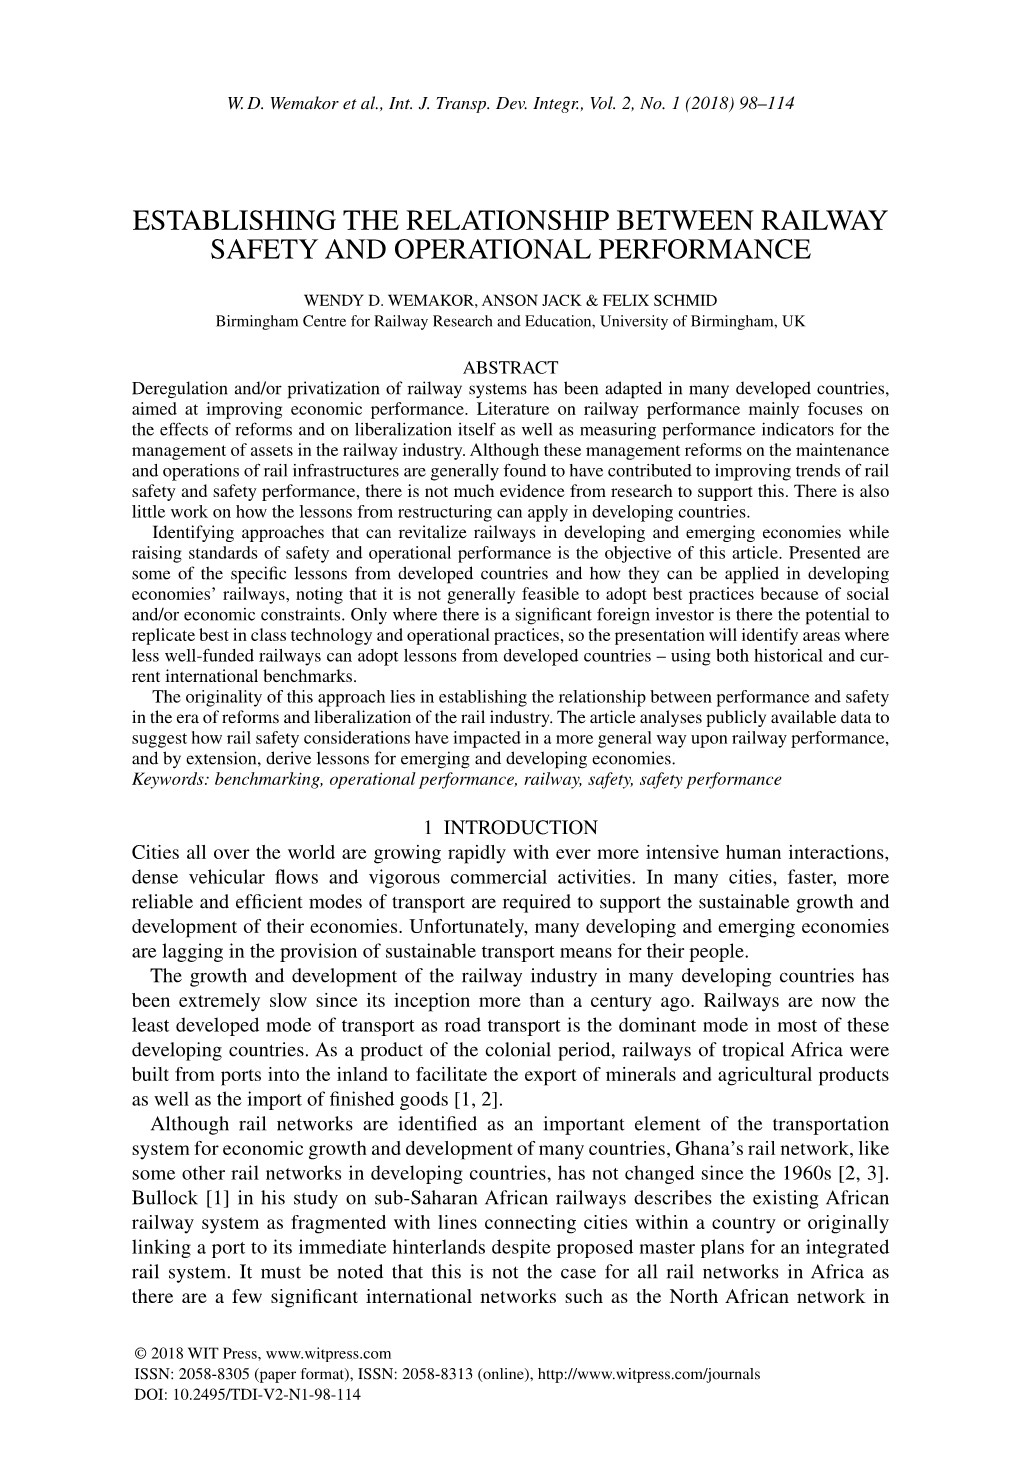 Establishing the Relationship Between Railway Safety and Operational Performance